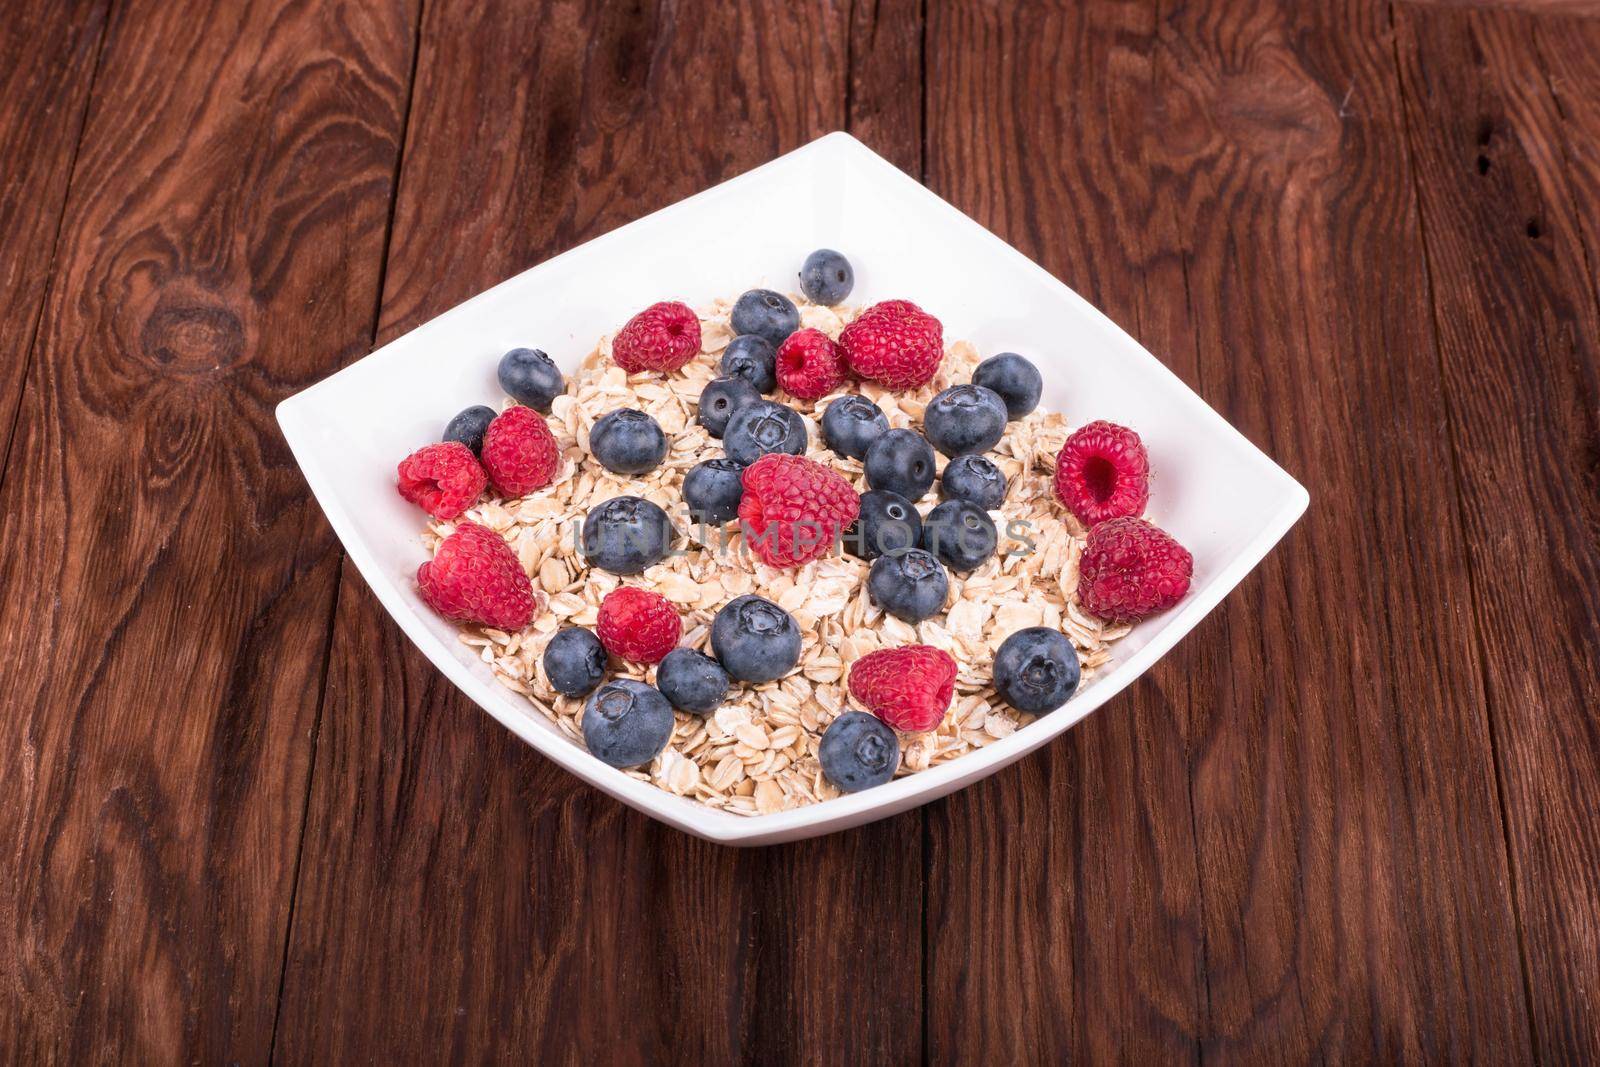 Oat flakes with berries by andregric